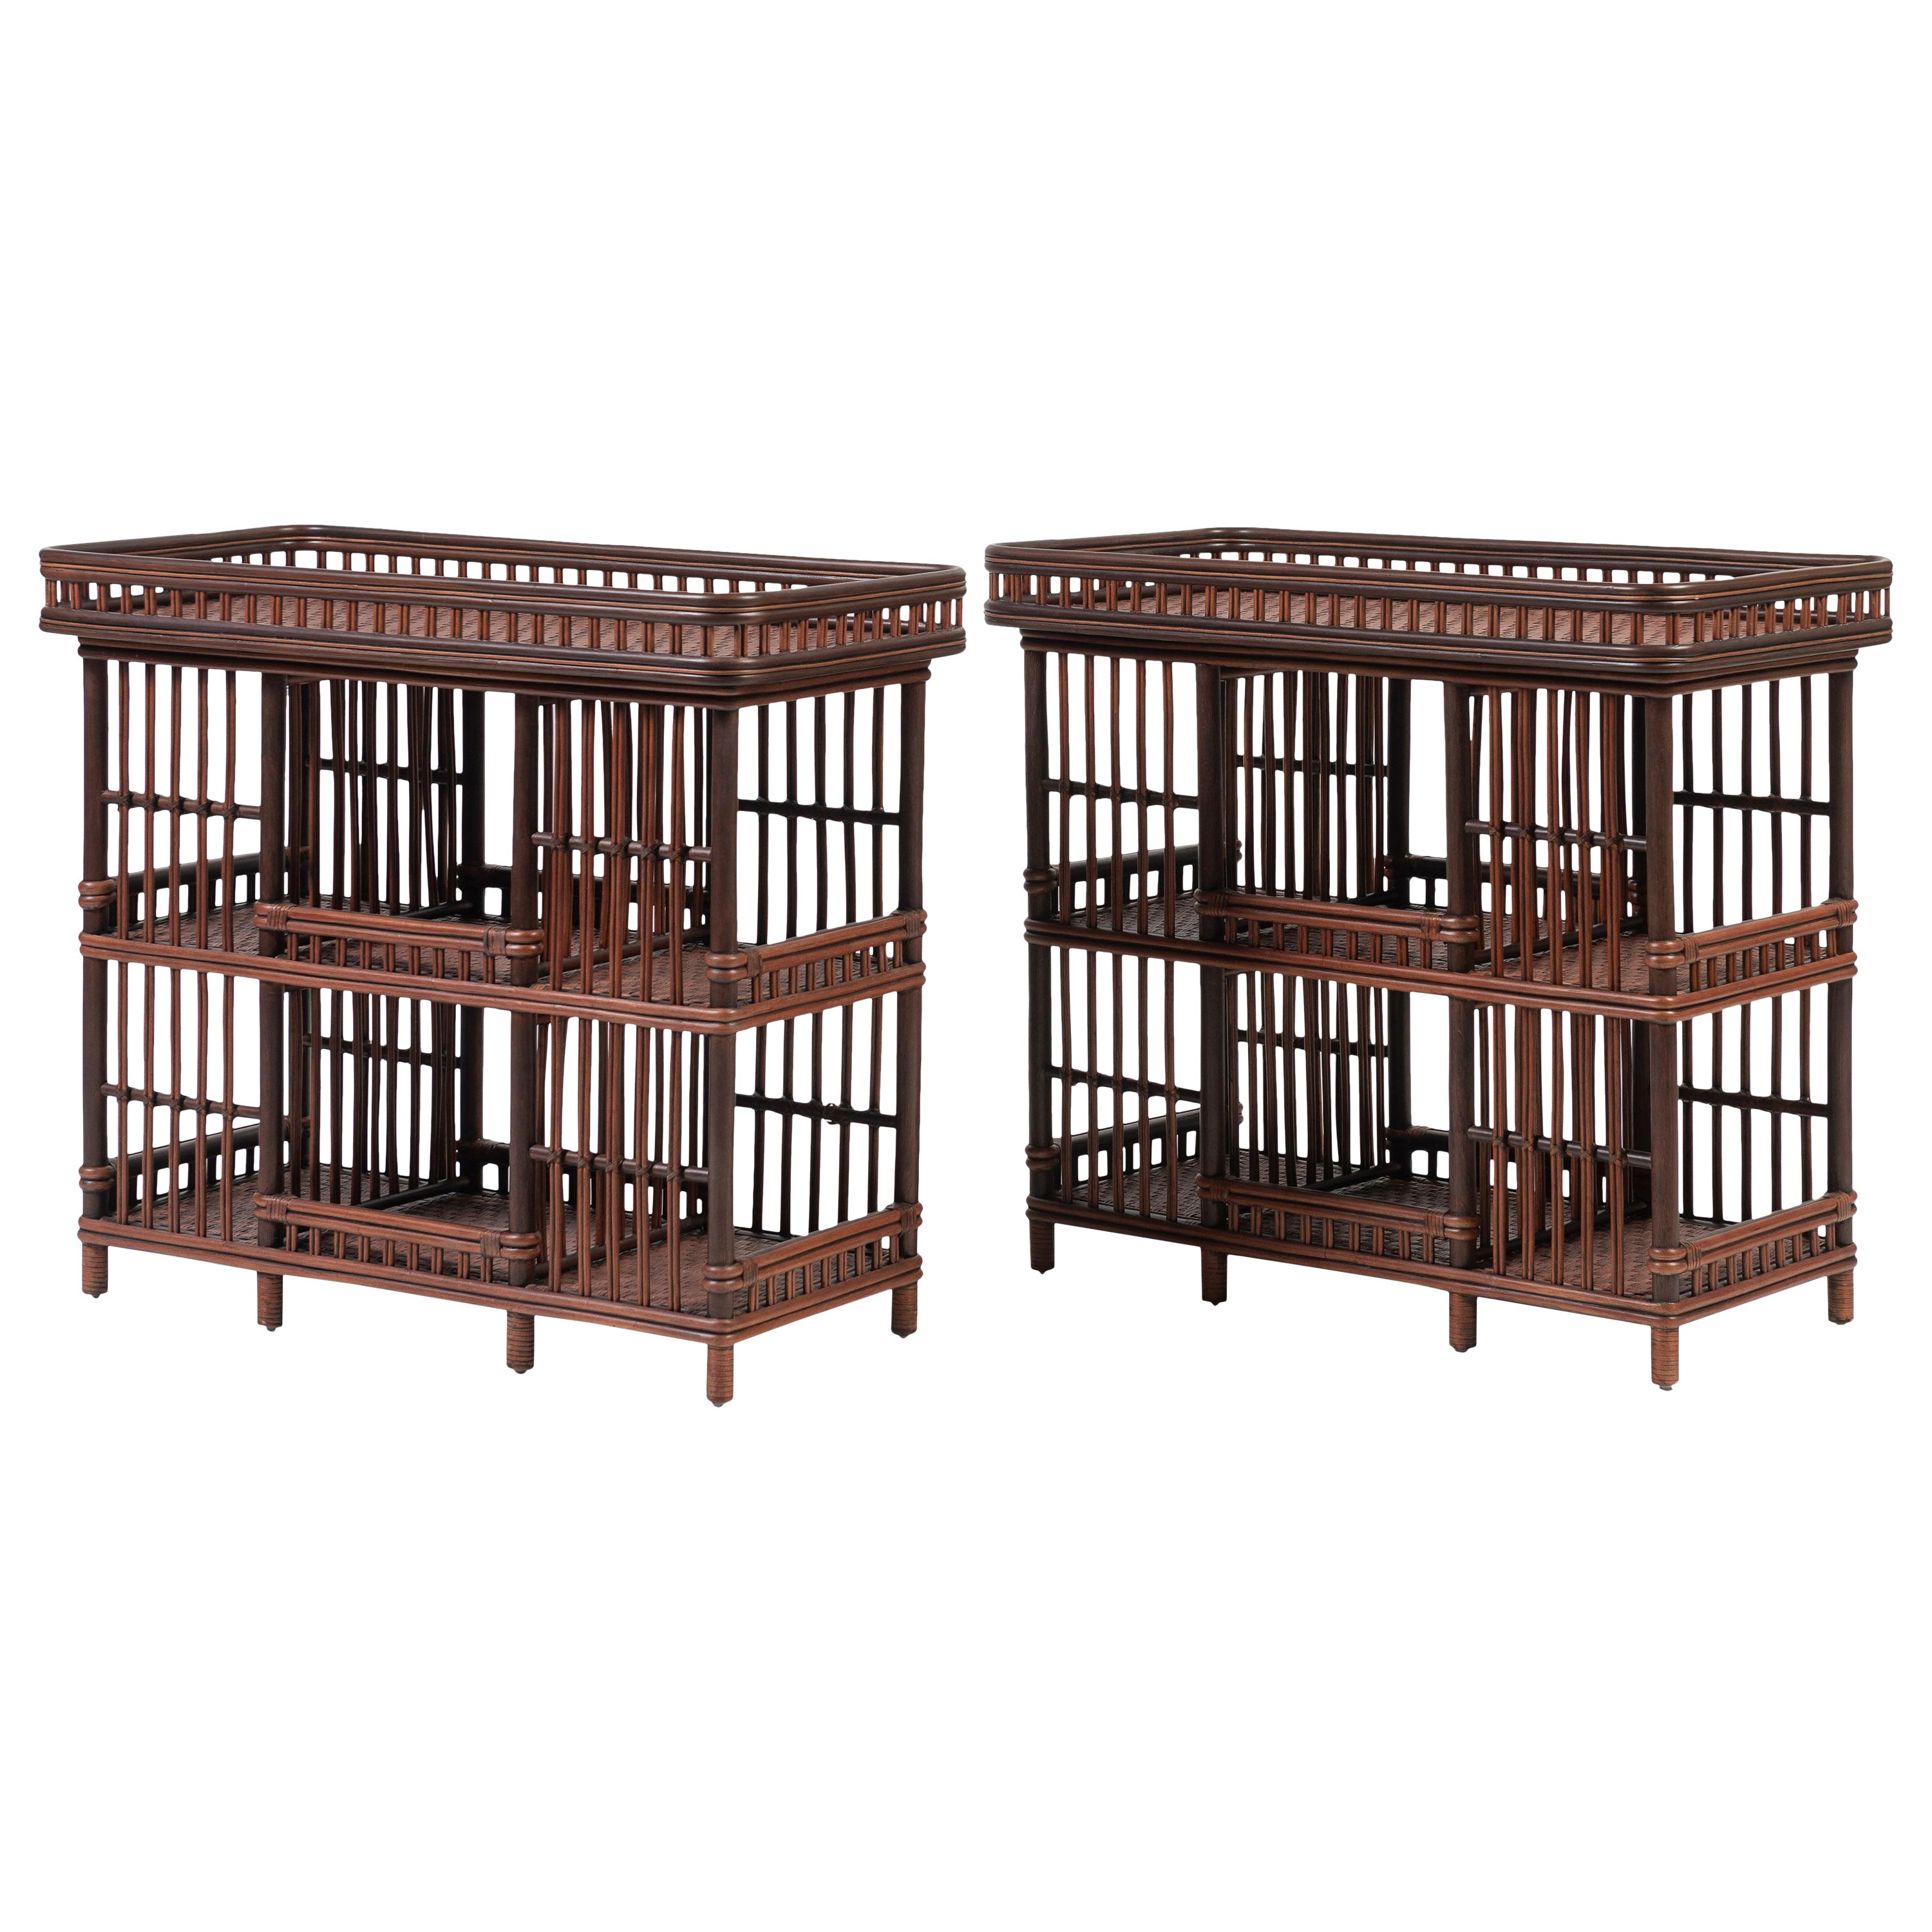 Two Williamsburg Coffee Finish Wicker Tiki Bars, Etegeres or Bookcases For Sale